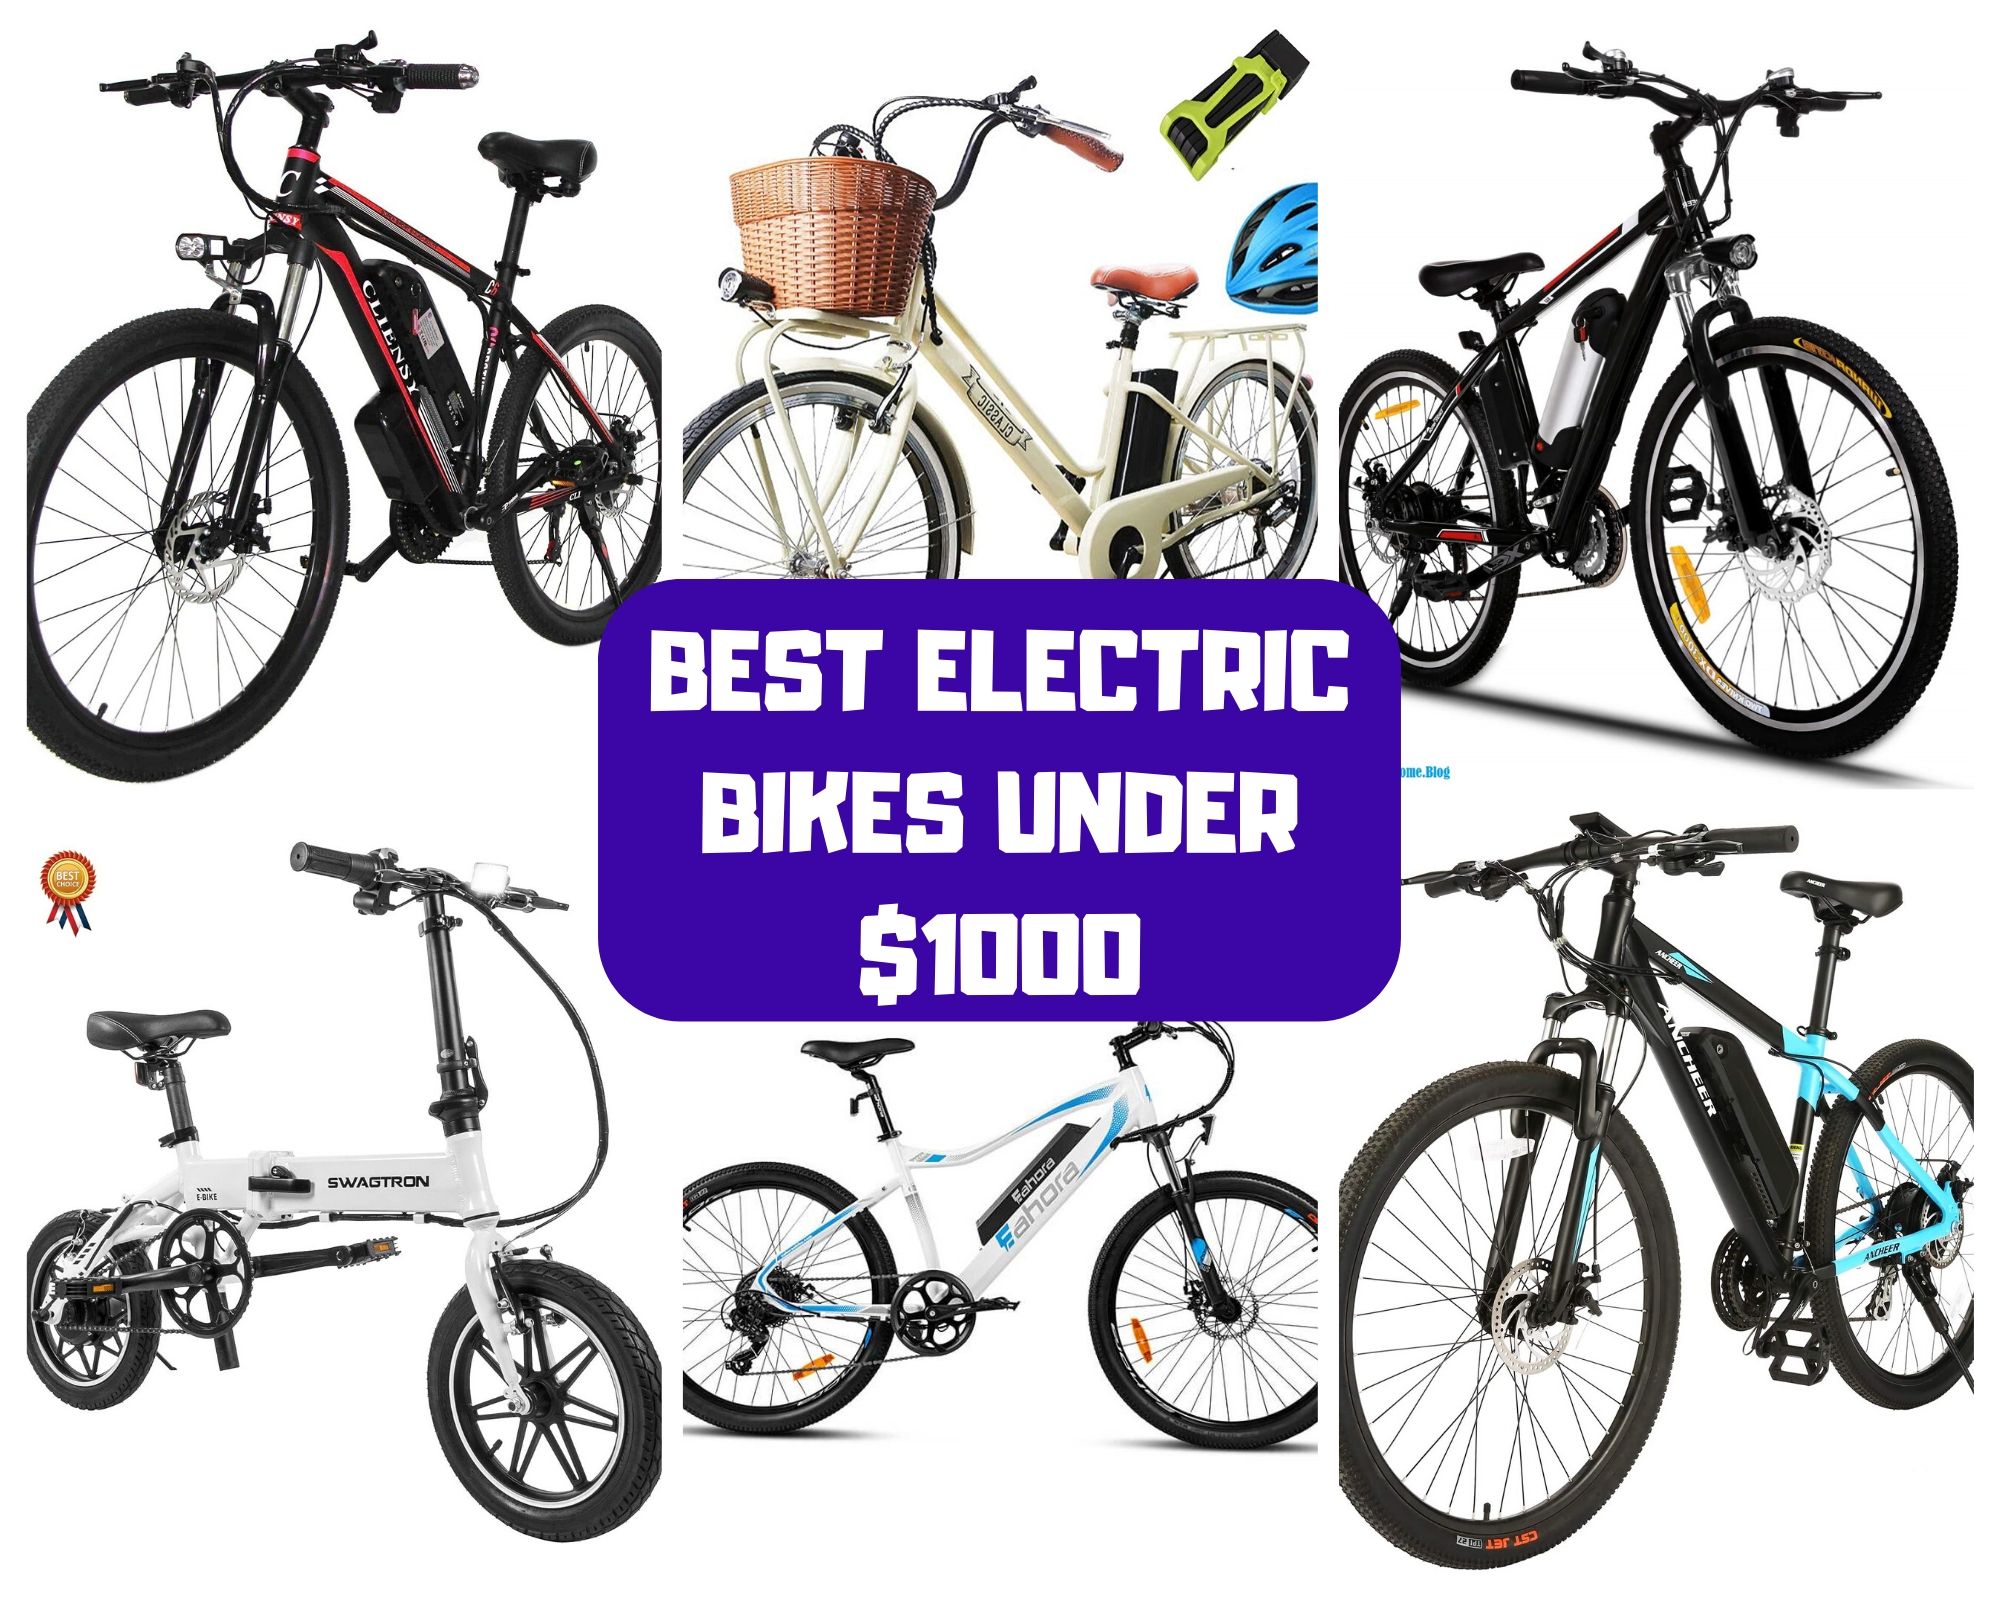 Best Electric Bikes Under $1000 in 2022 – Reviews & Buyer Guide